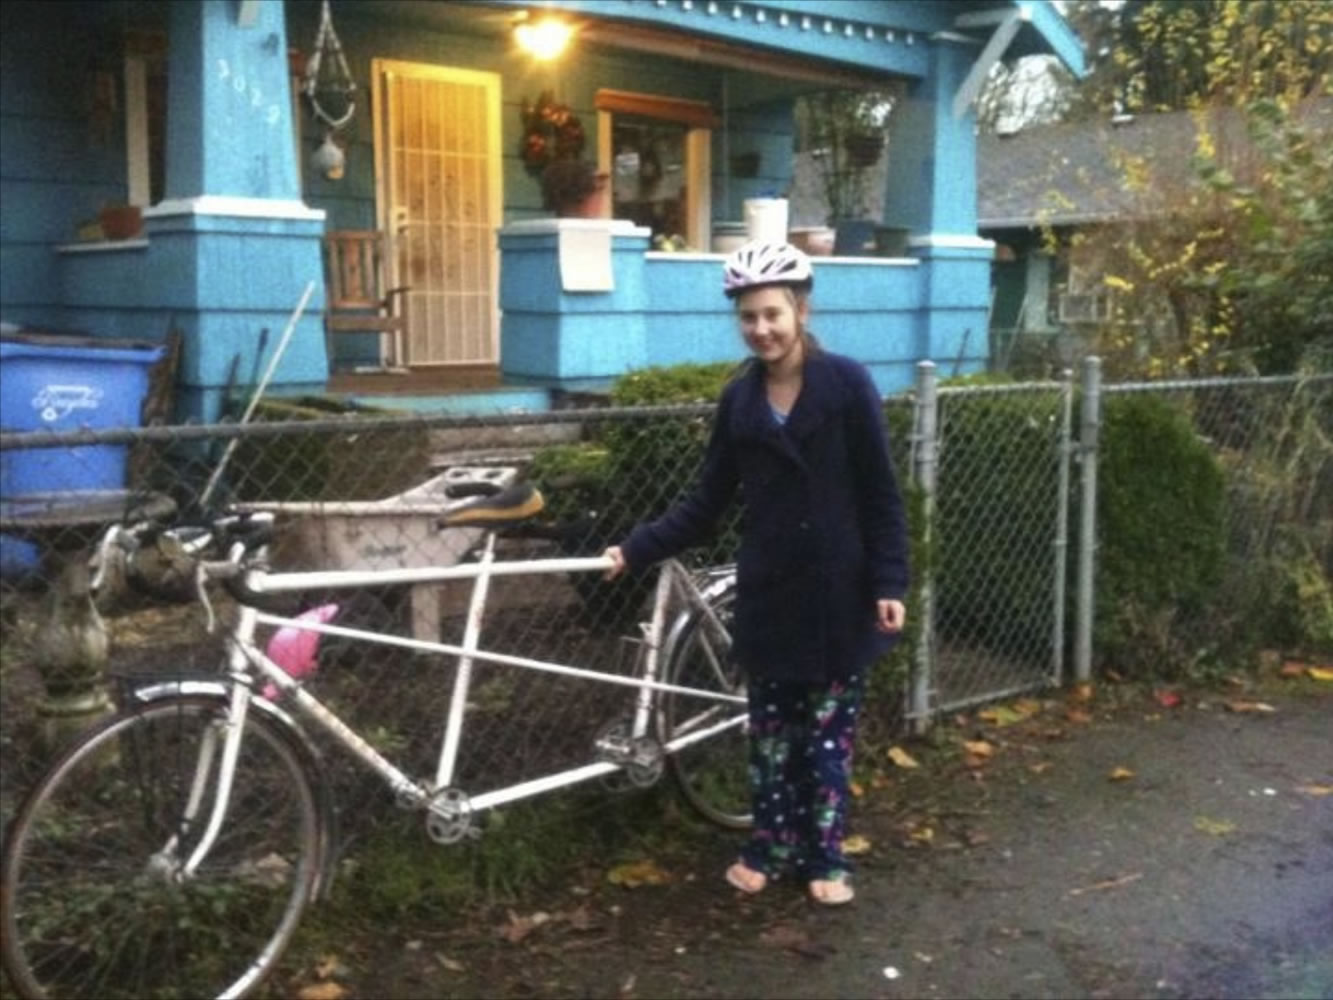 Courtney Forbes stands next to her tandem bicycle.